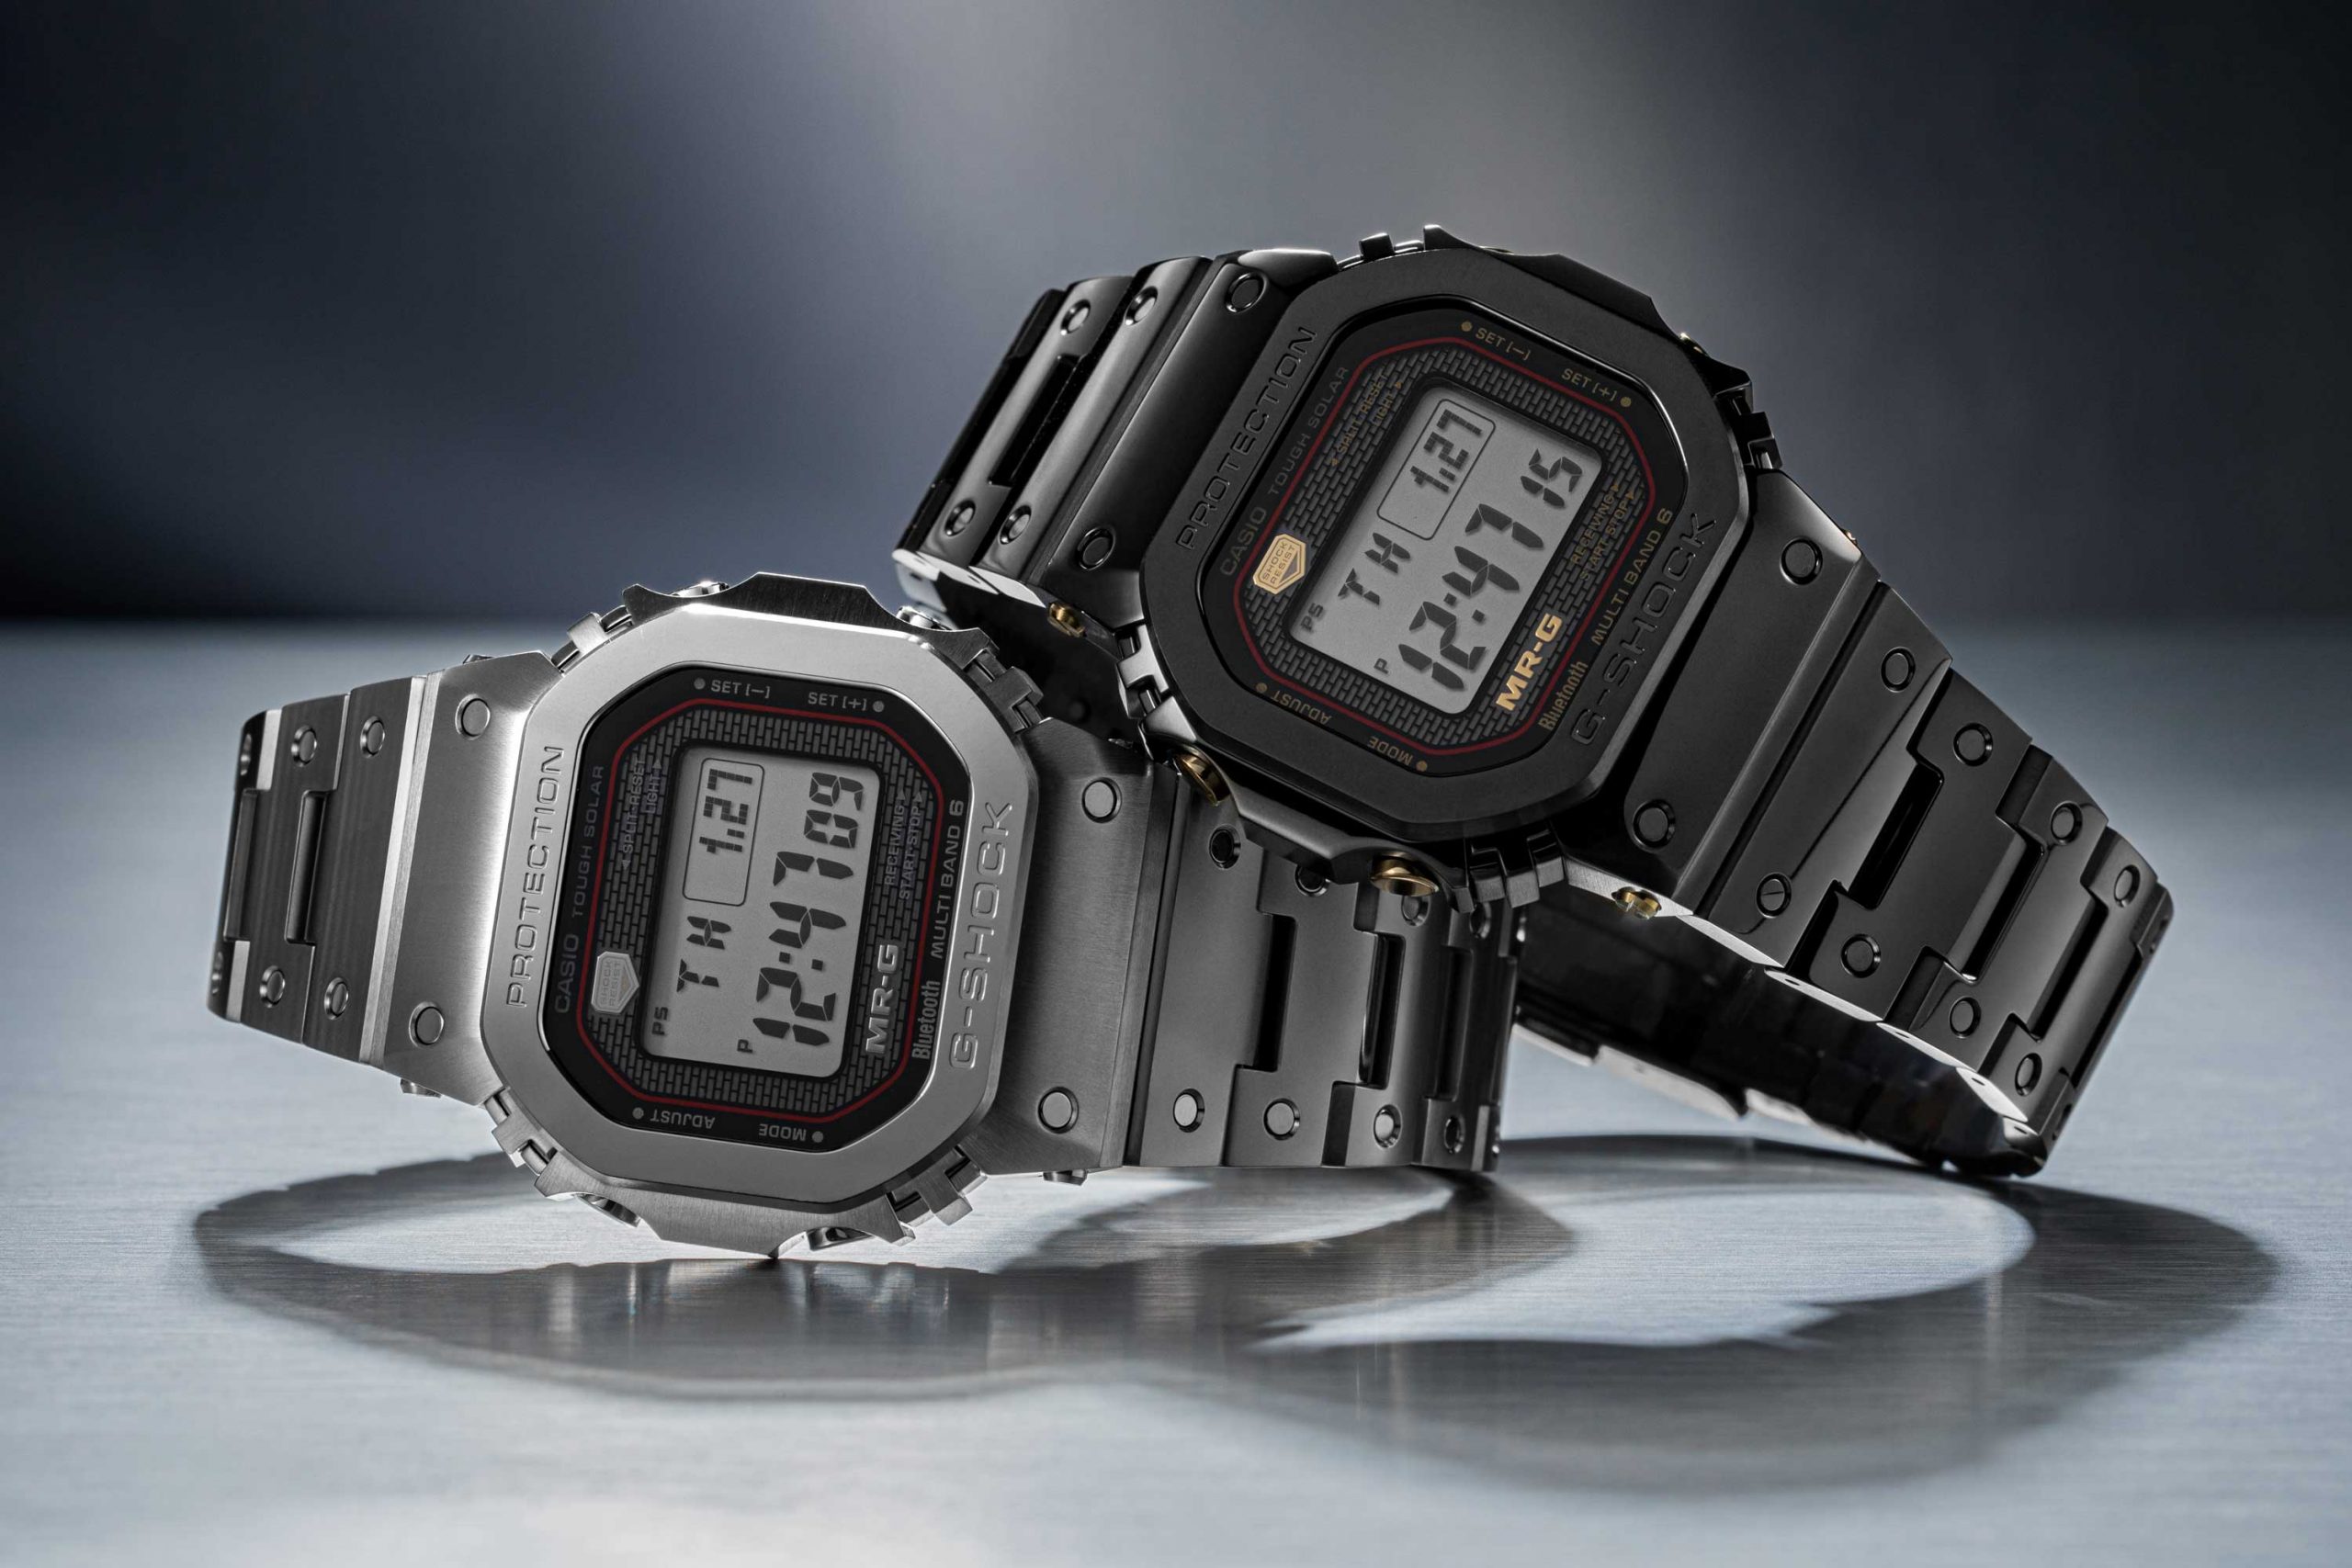 The G-SHOCK MRG-B5000D-1 in stainless steel and the MRG-B5000B-1 with a black DLC coating (©Revolution)